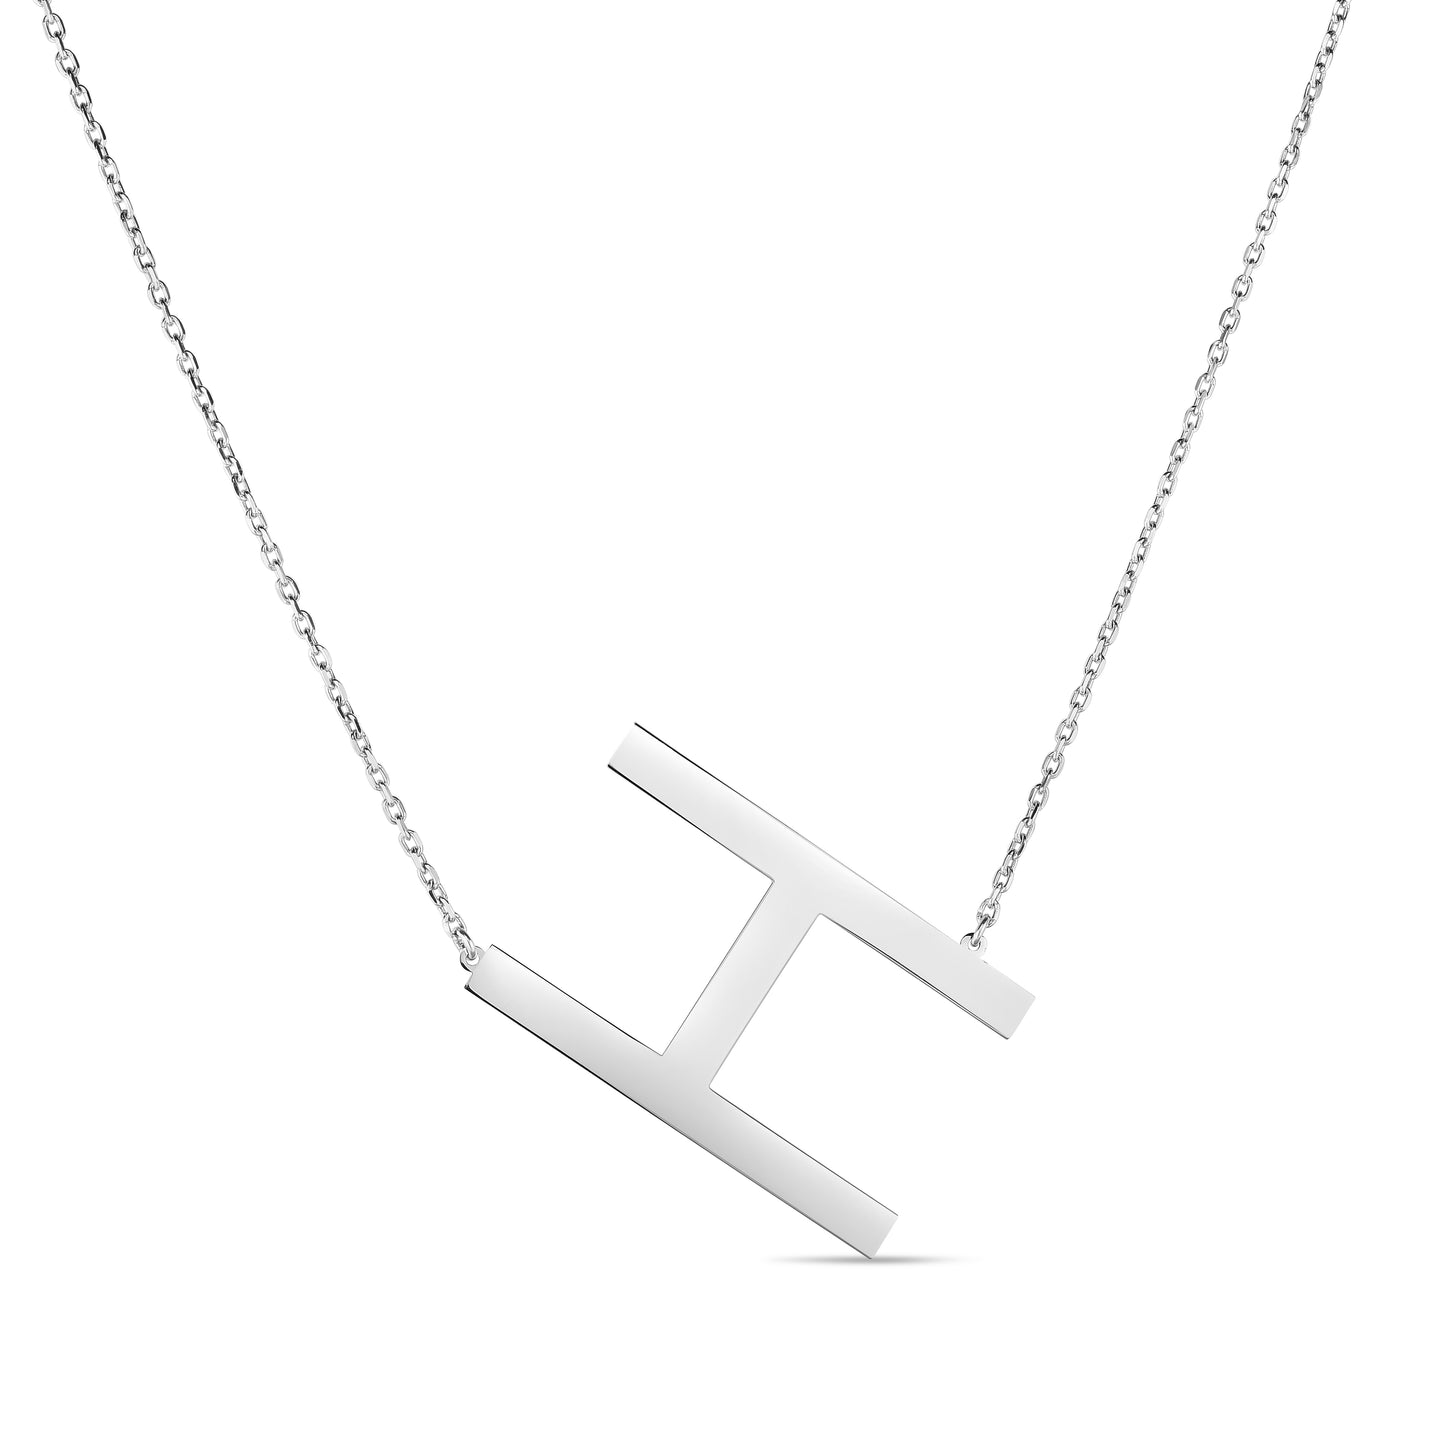 Silver H Letter Necklace